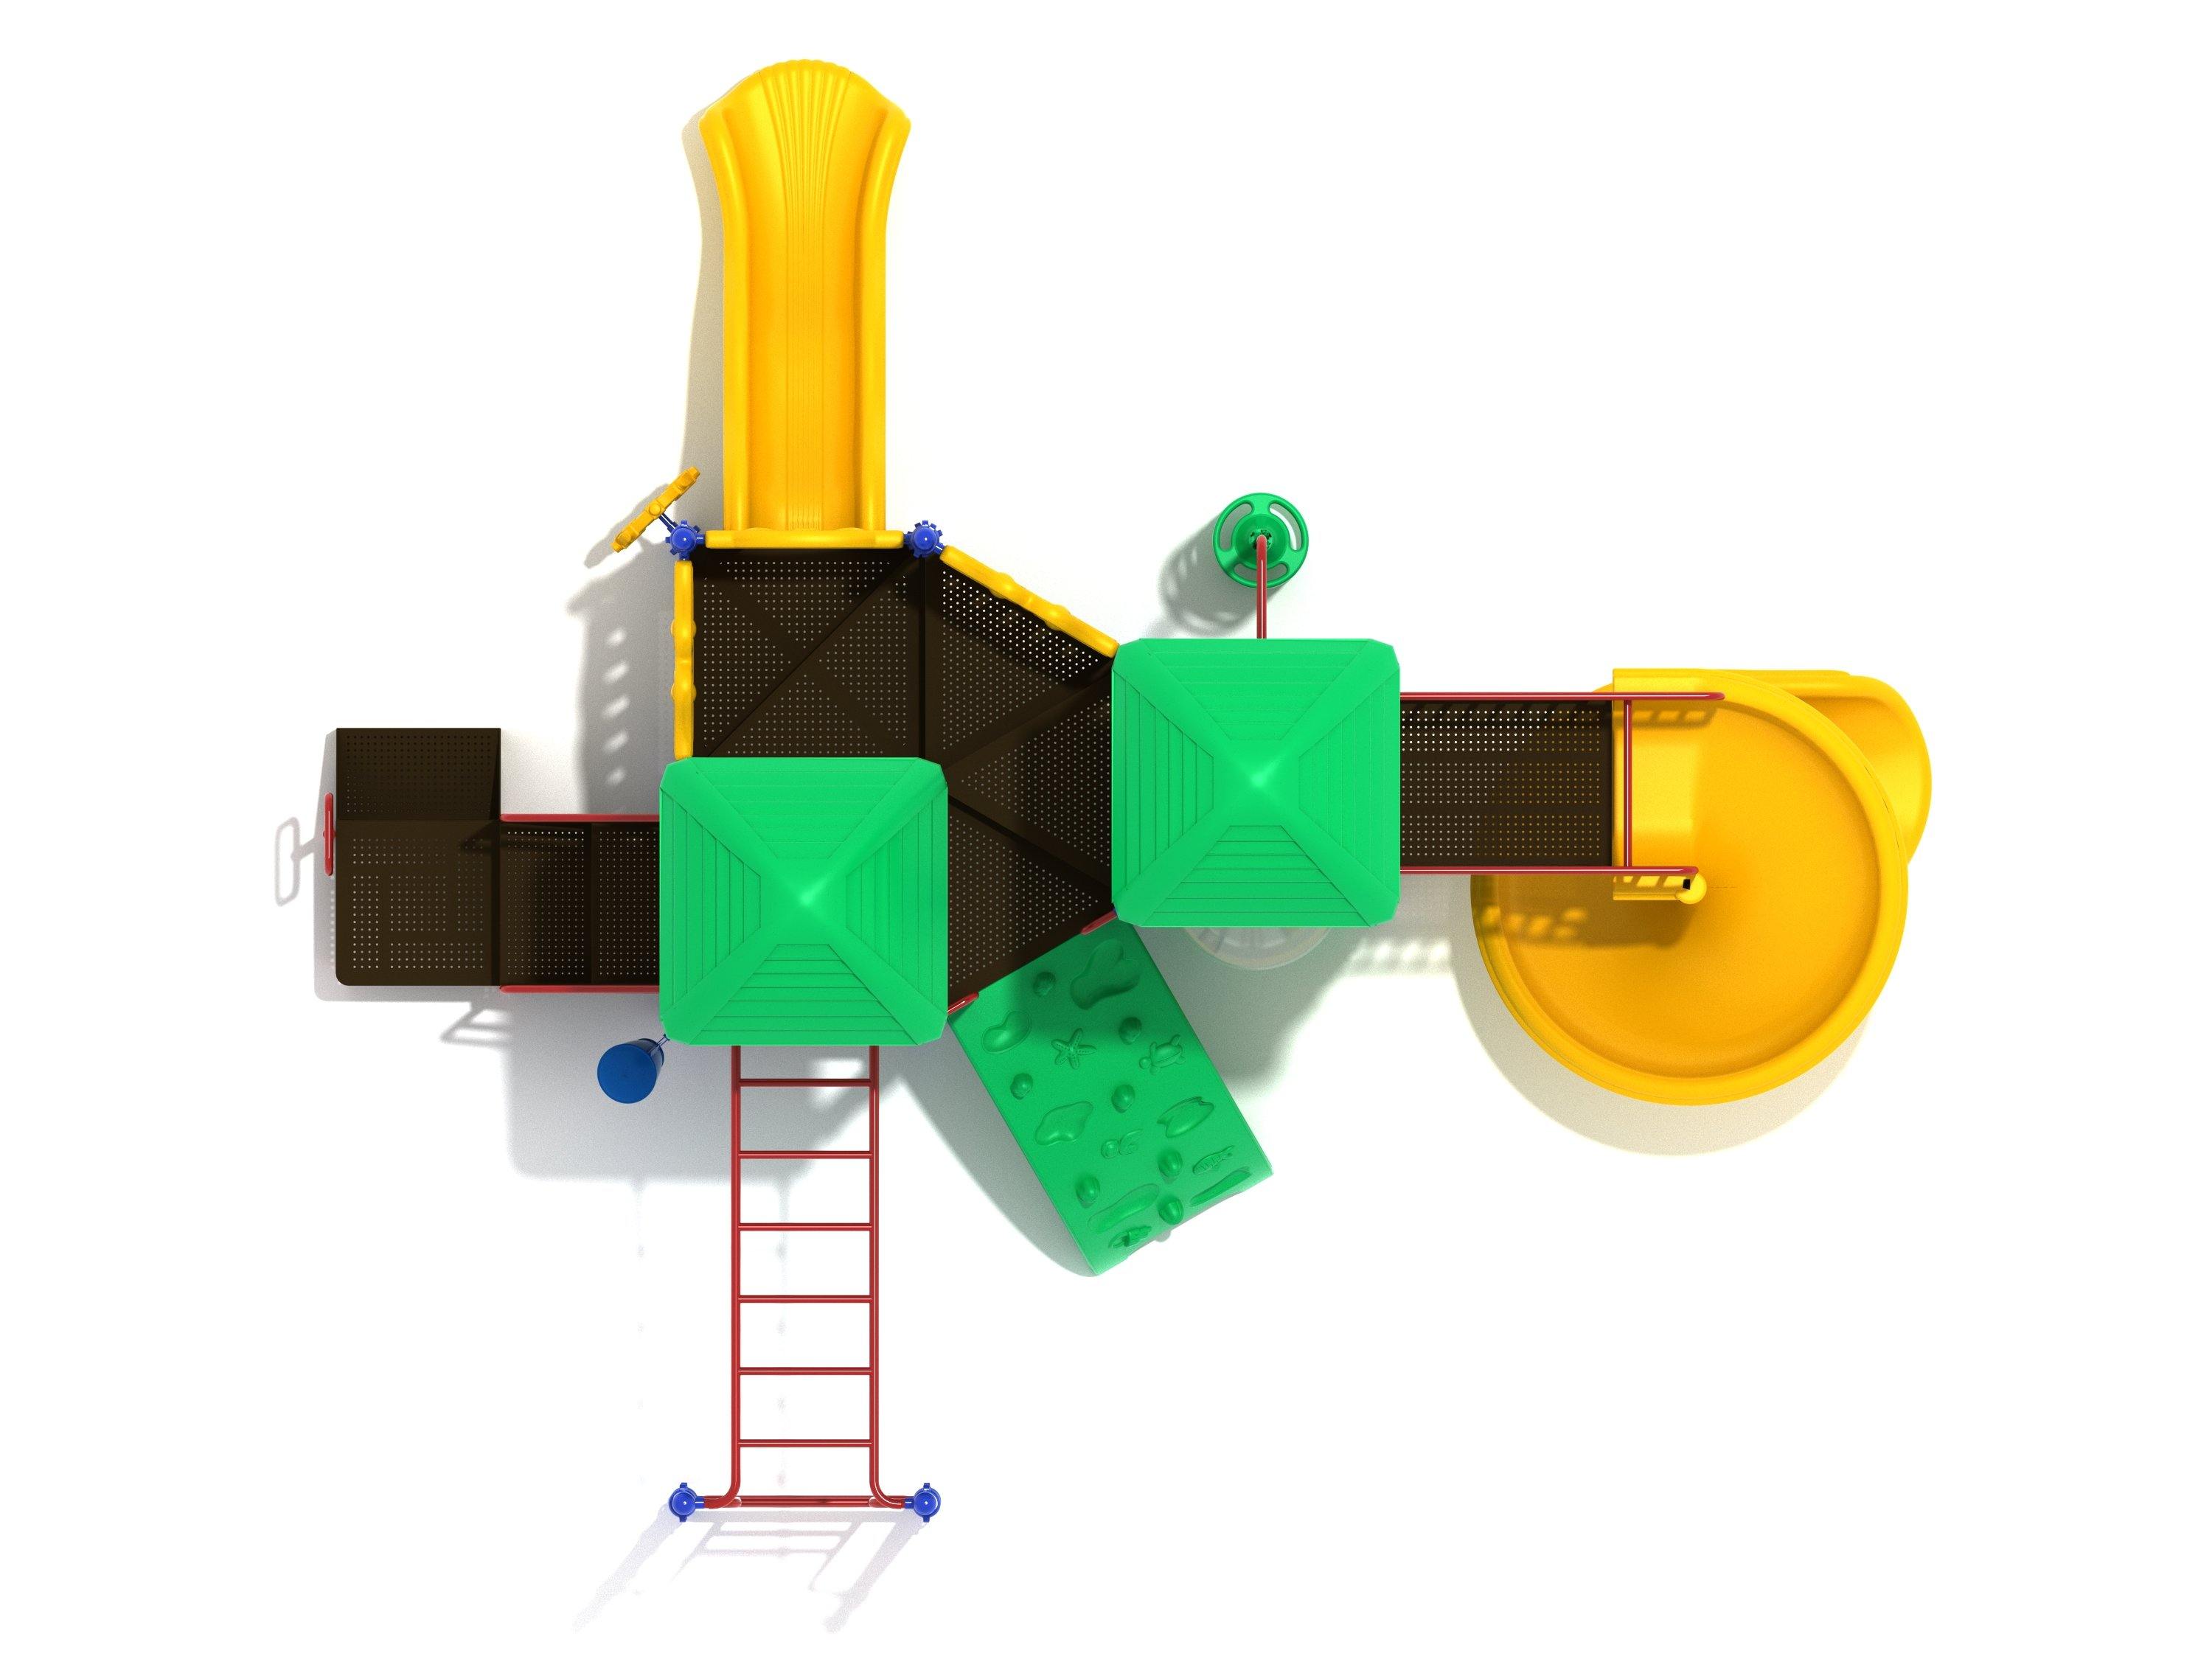 Cooper's Neck - River City Play Systems